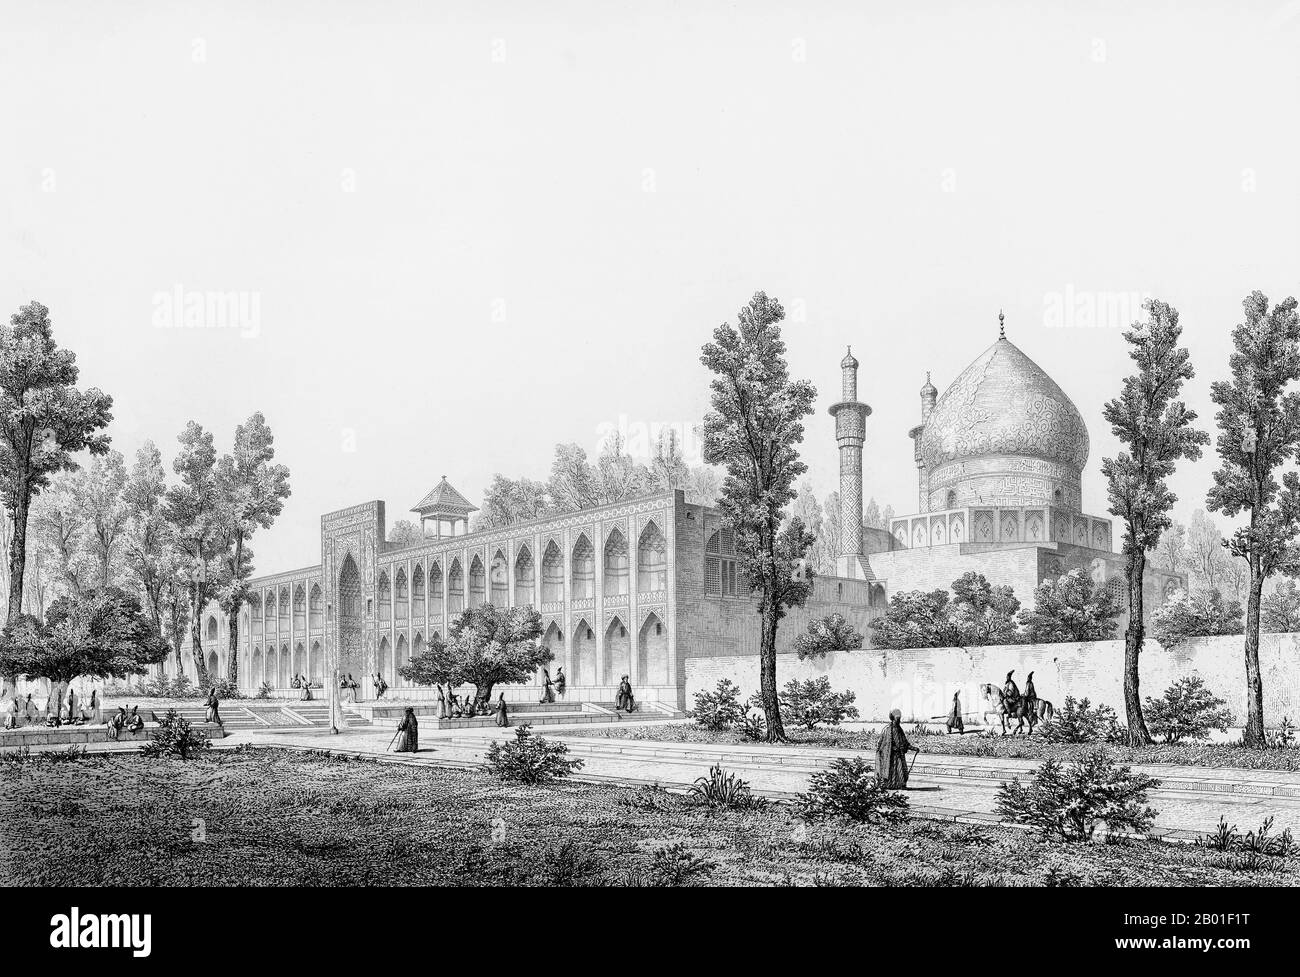 Iran/Persia: Madrasa-yi Masjid-i Shah Sultan Hussein, Isfahan, by Pascal Coste (26 November 1787 - 8 February 1879), c. 1845.  Xavier Pascal Coste was a French architect. His father was one of the leading joiners in Marseille. Showing intellectual and artistic promise, Pascal began his studies in the studio of Penchaud, architect of the département and the municipalité. In 1814, he was received into the École des Beaux-Arts in Paris. His time in Paris was a pivotal one in his life - there he met the geographer Edme François Jomard, who put him in touch with the viceroy of Egypt. Stock Photo